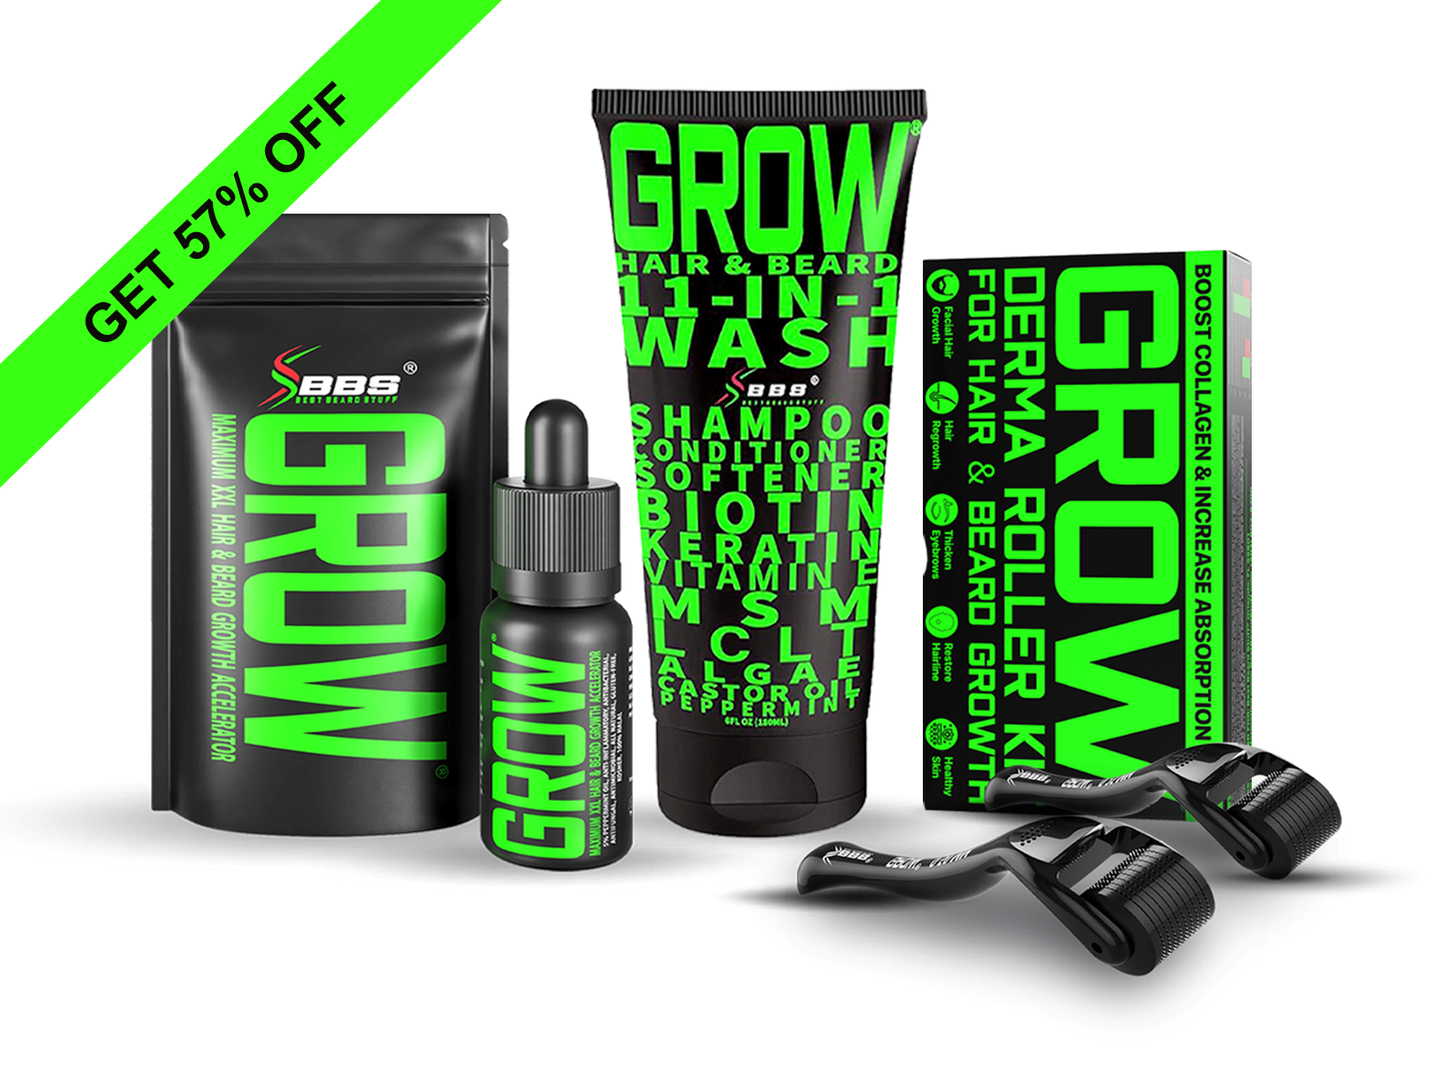 SPECIAL OFFER!! GROW® MORE Hair & Beard 11-in-1 Wash Growth Kit Upgrade